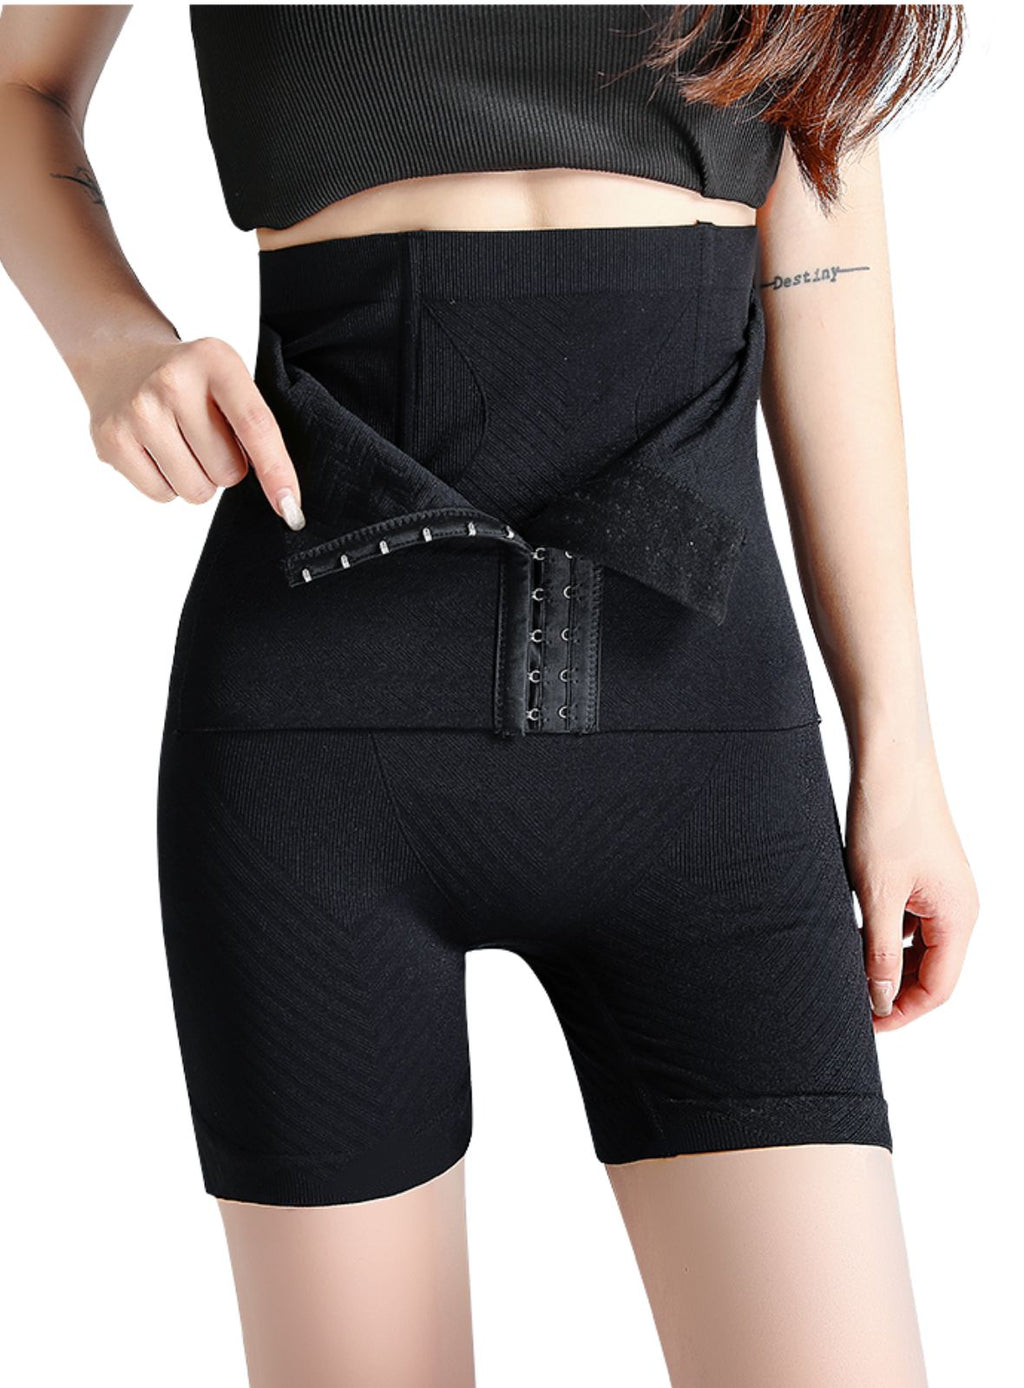 Premium Saloma High-Waisted Shaping & Compression Girdle Body Shaper S –  Kiss & Tell Malaysia